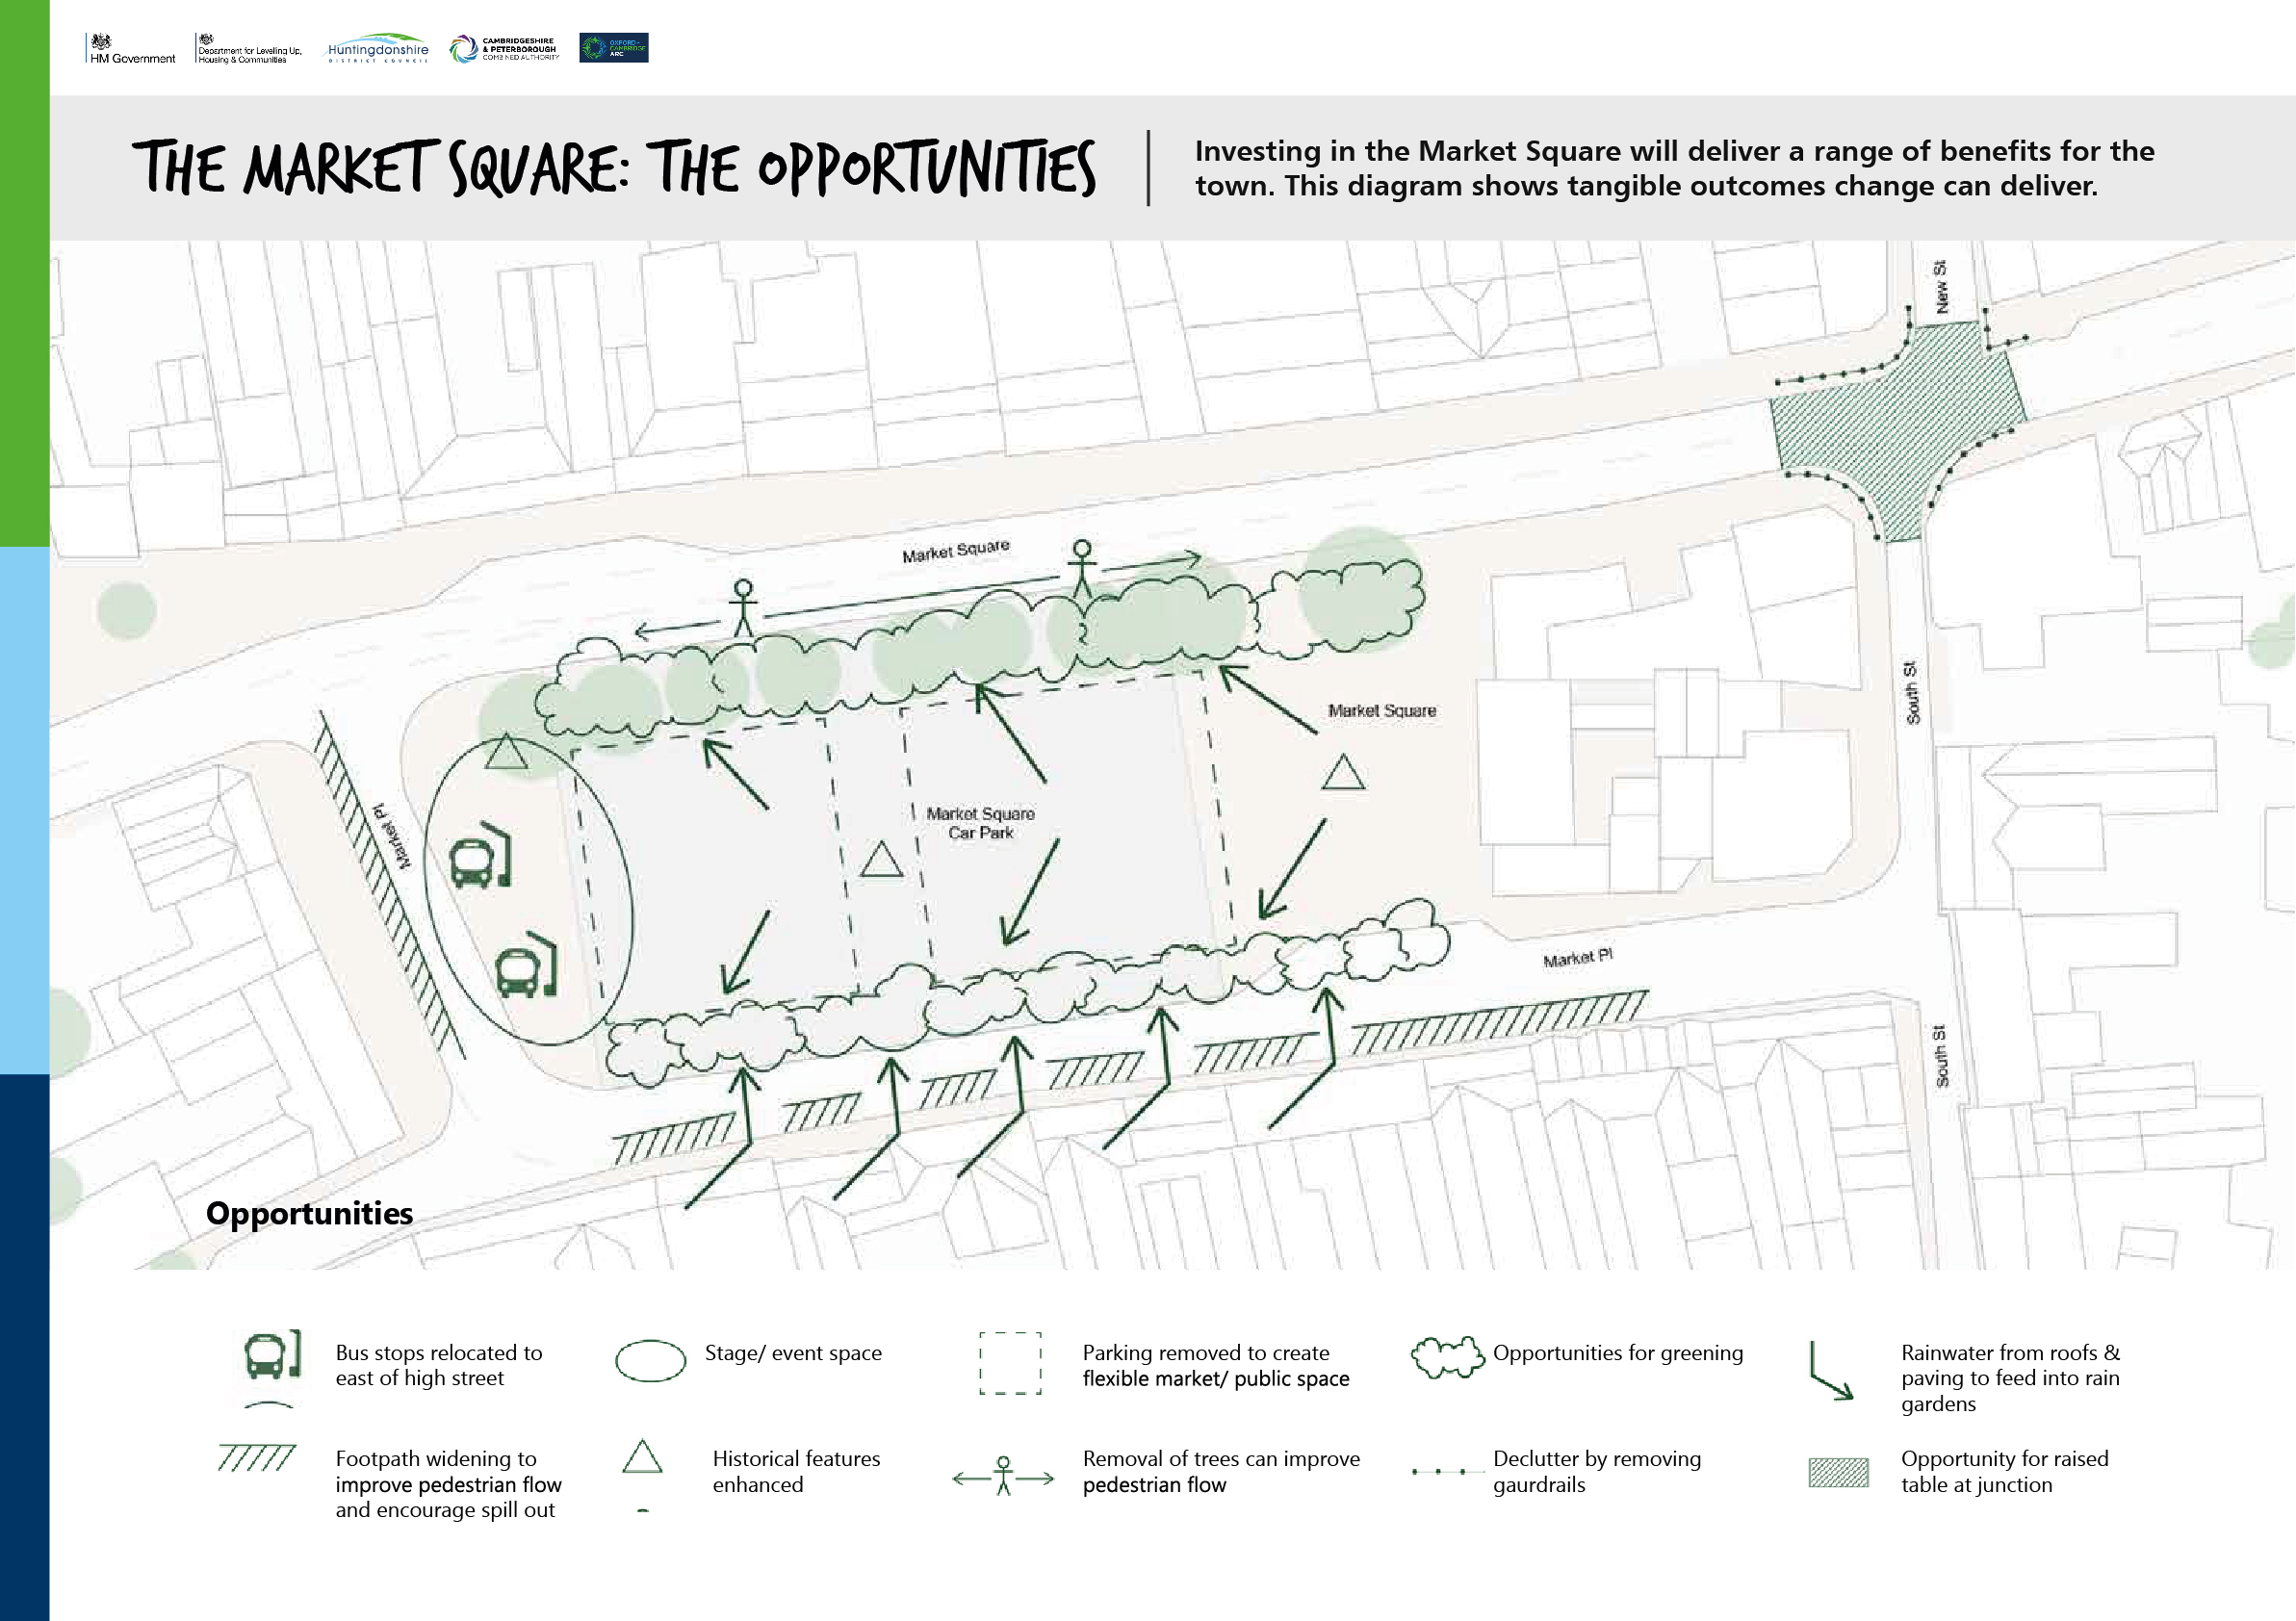 The Market Square: The opportunities. Investing in the Market Square will deliver a range of benefits for the town. This diagram shows tangible outcomes change can deliver. Image of map showing new layout